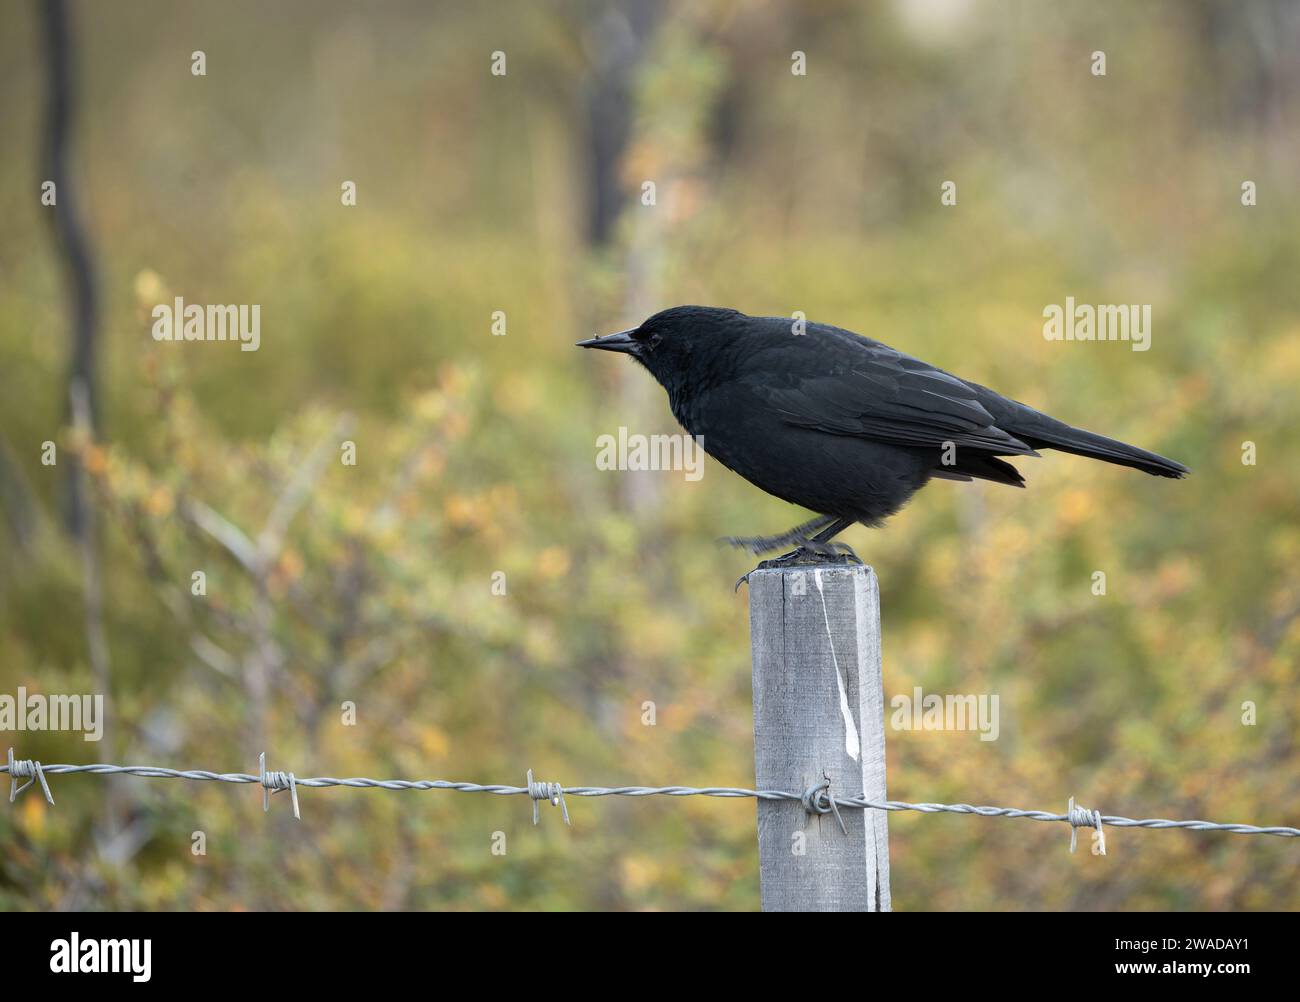 Austral blackbird standing on a fence Stock Photo